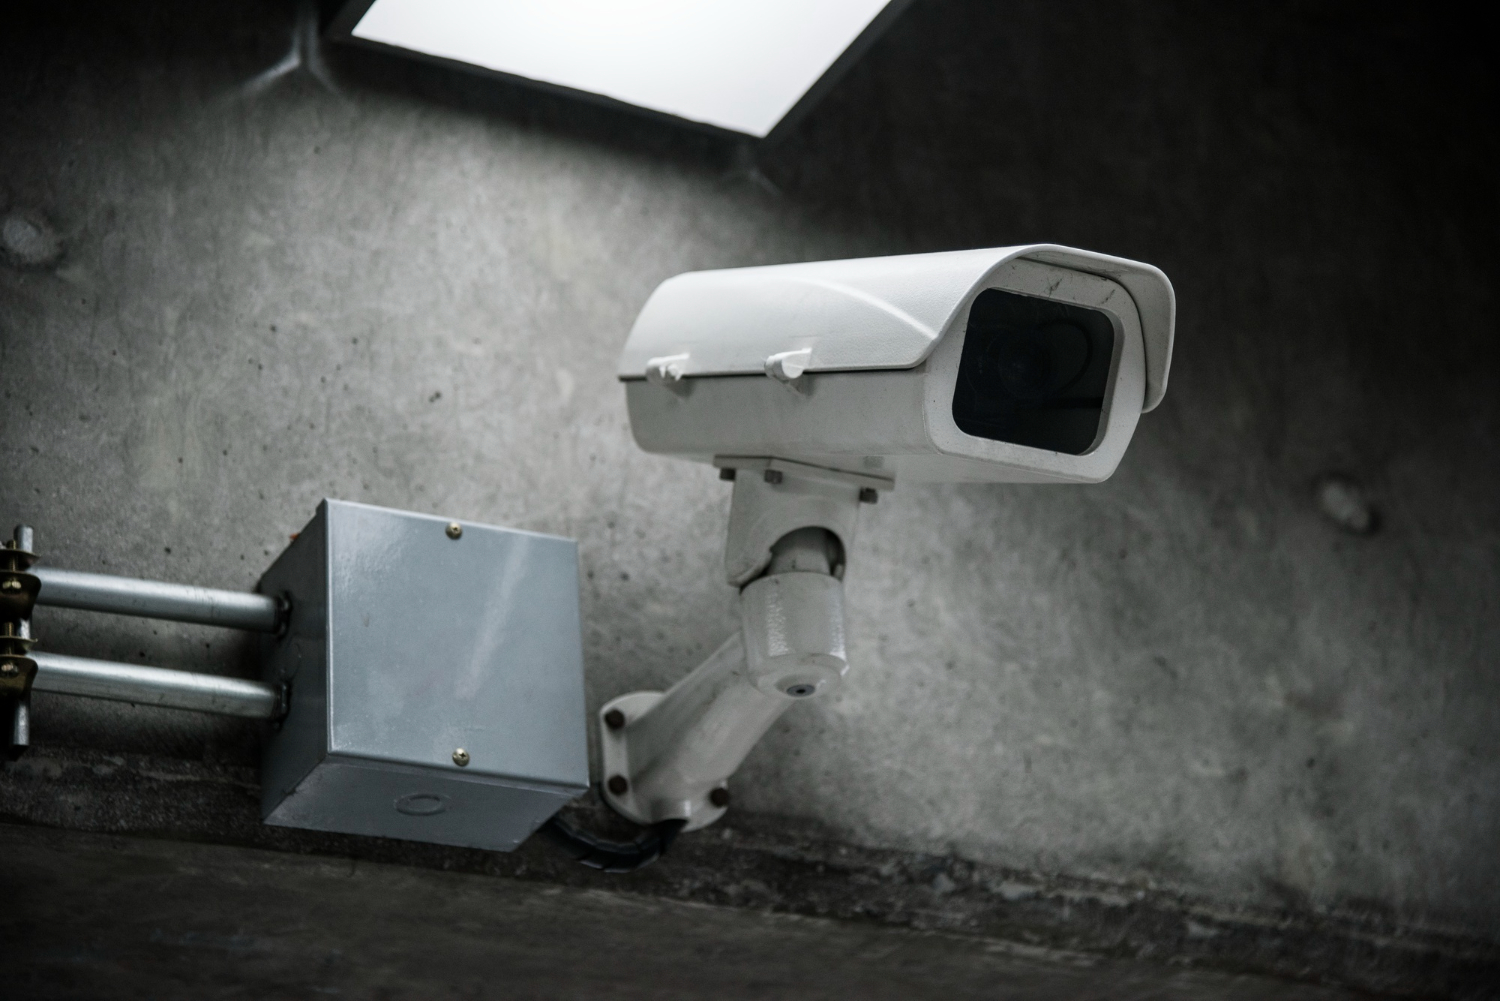 Towing the Line: Security Cameras vs Personal Privacy in Australian Spaces